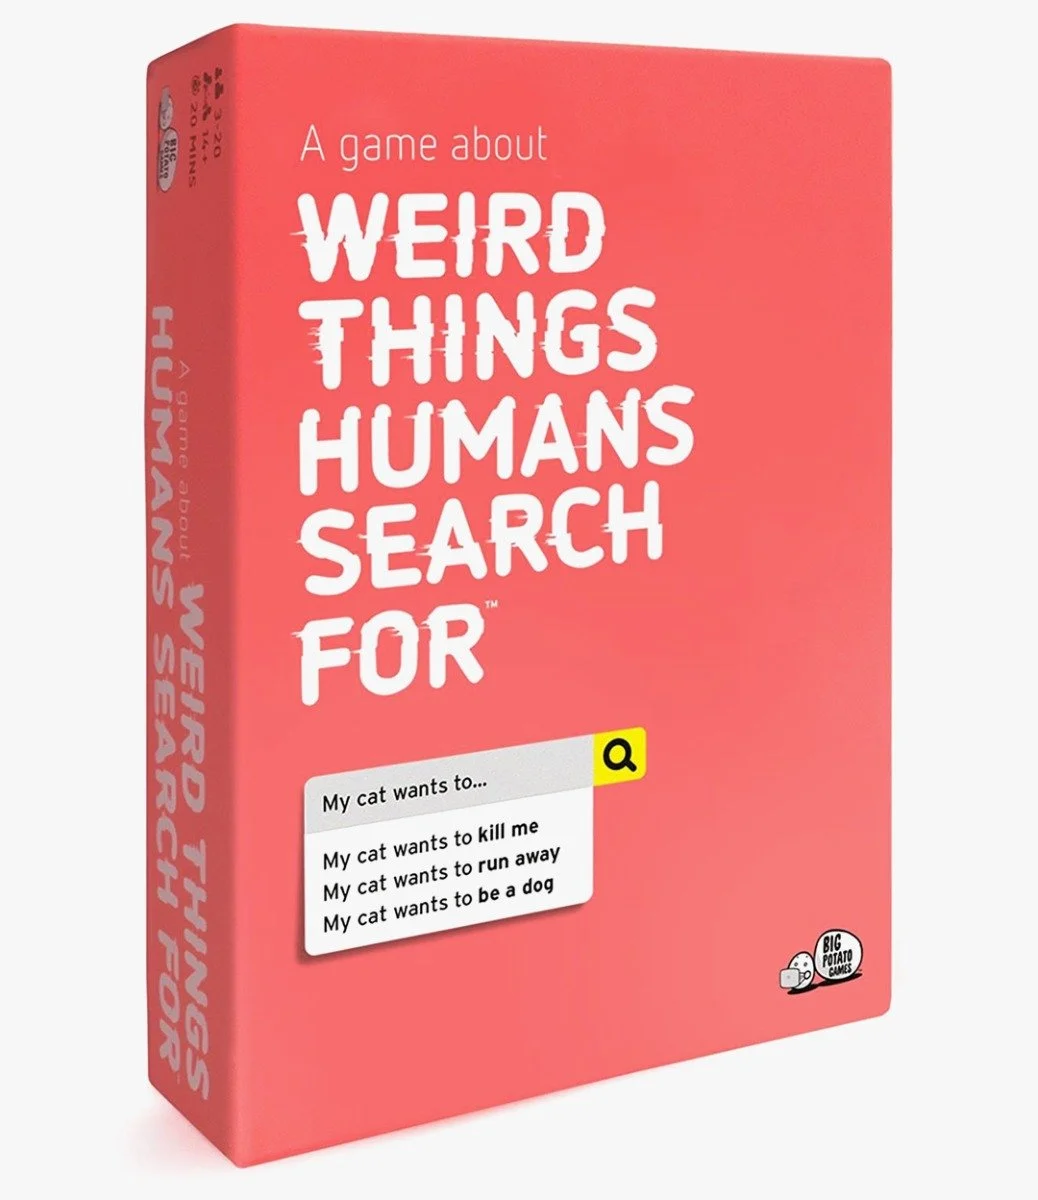 Weird Things Humans Search For  By Big Potato Games